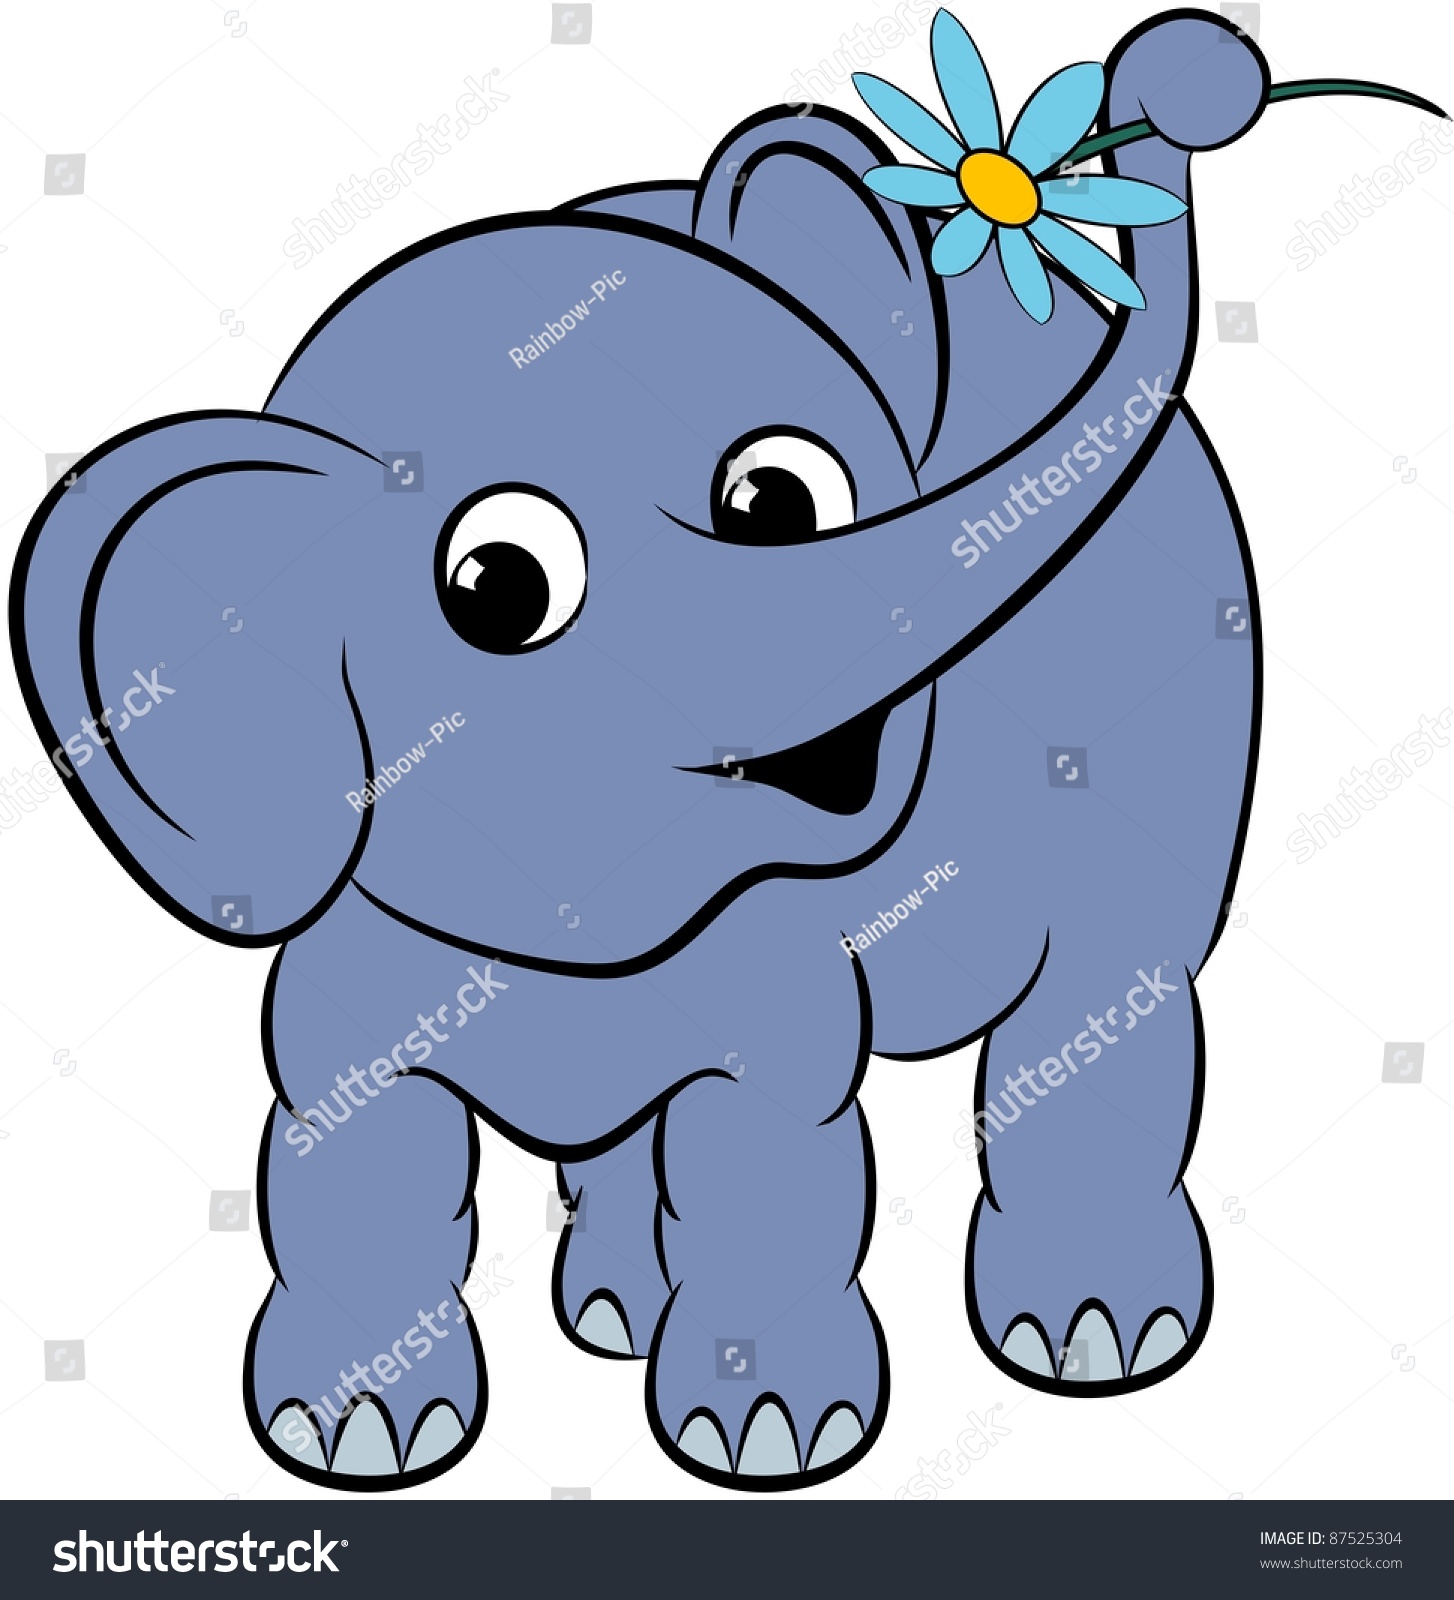 Elephant With A Flower Stock Photo 87525304 : Shutterstock